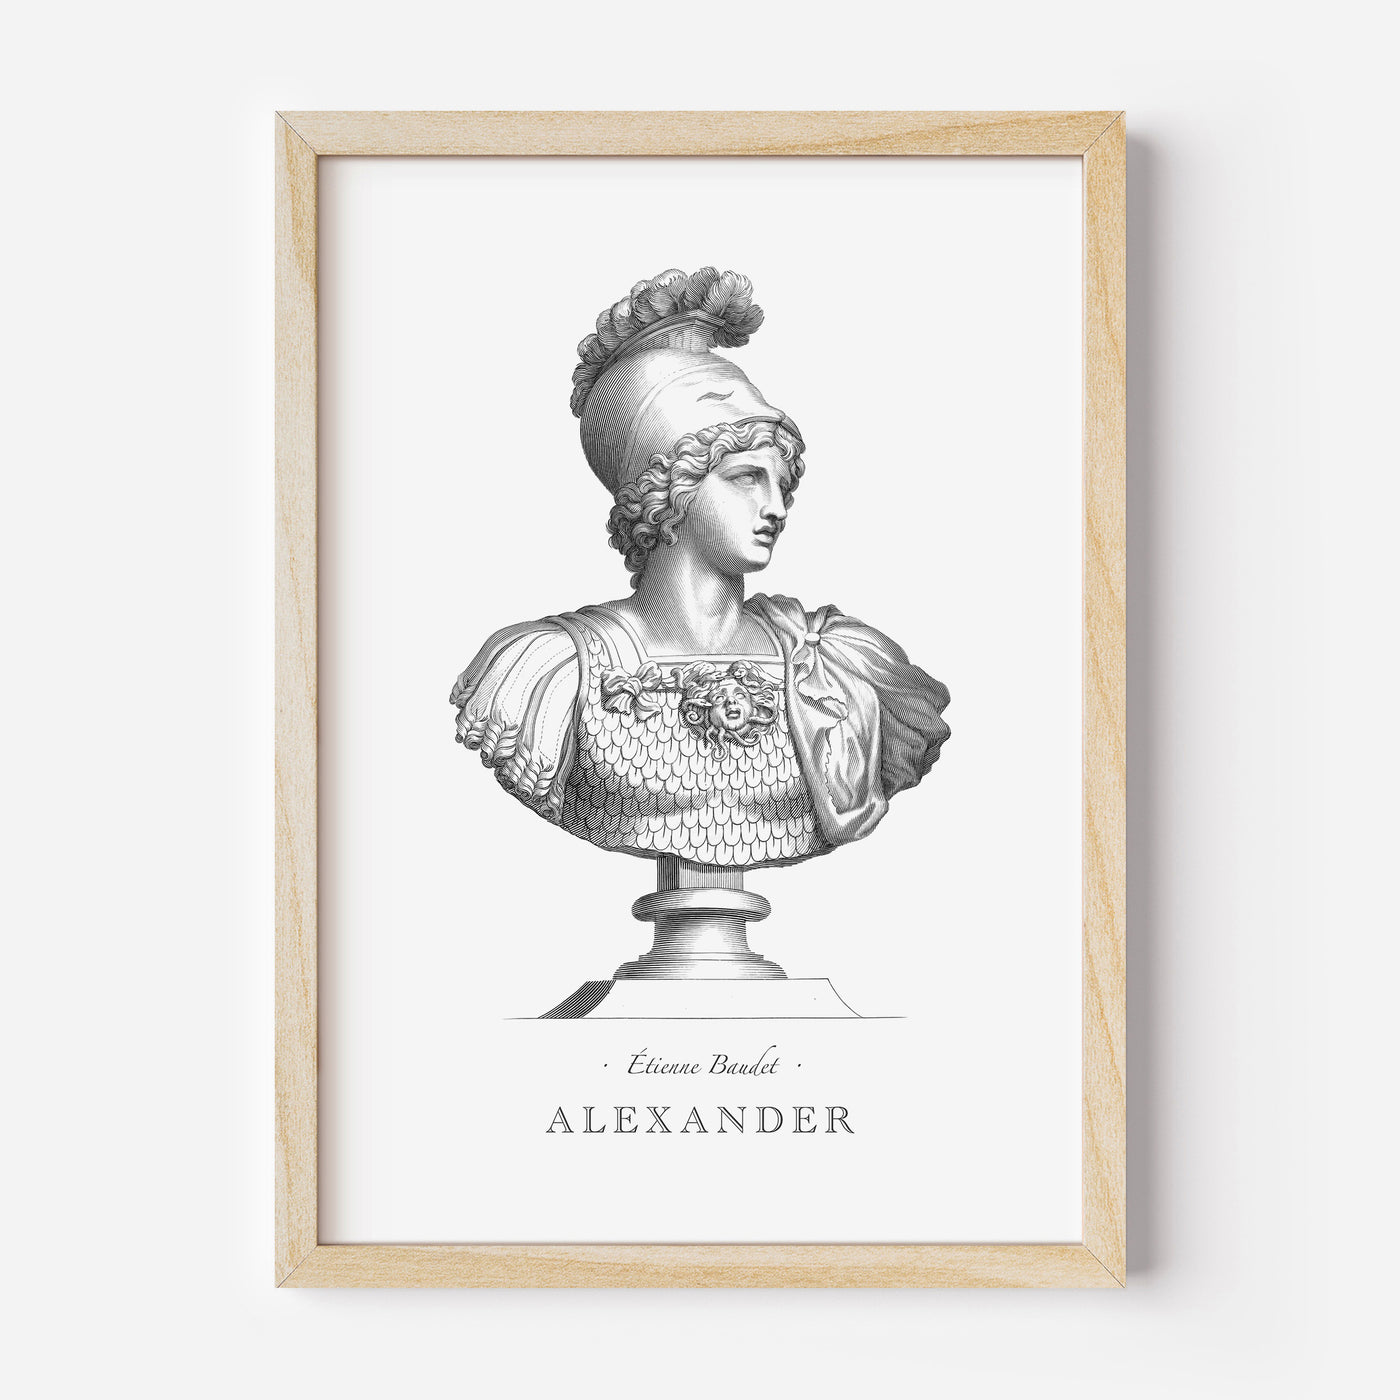 Alexander the Great engraving